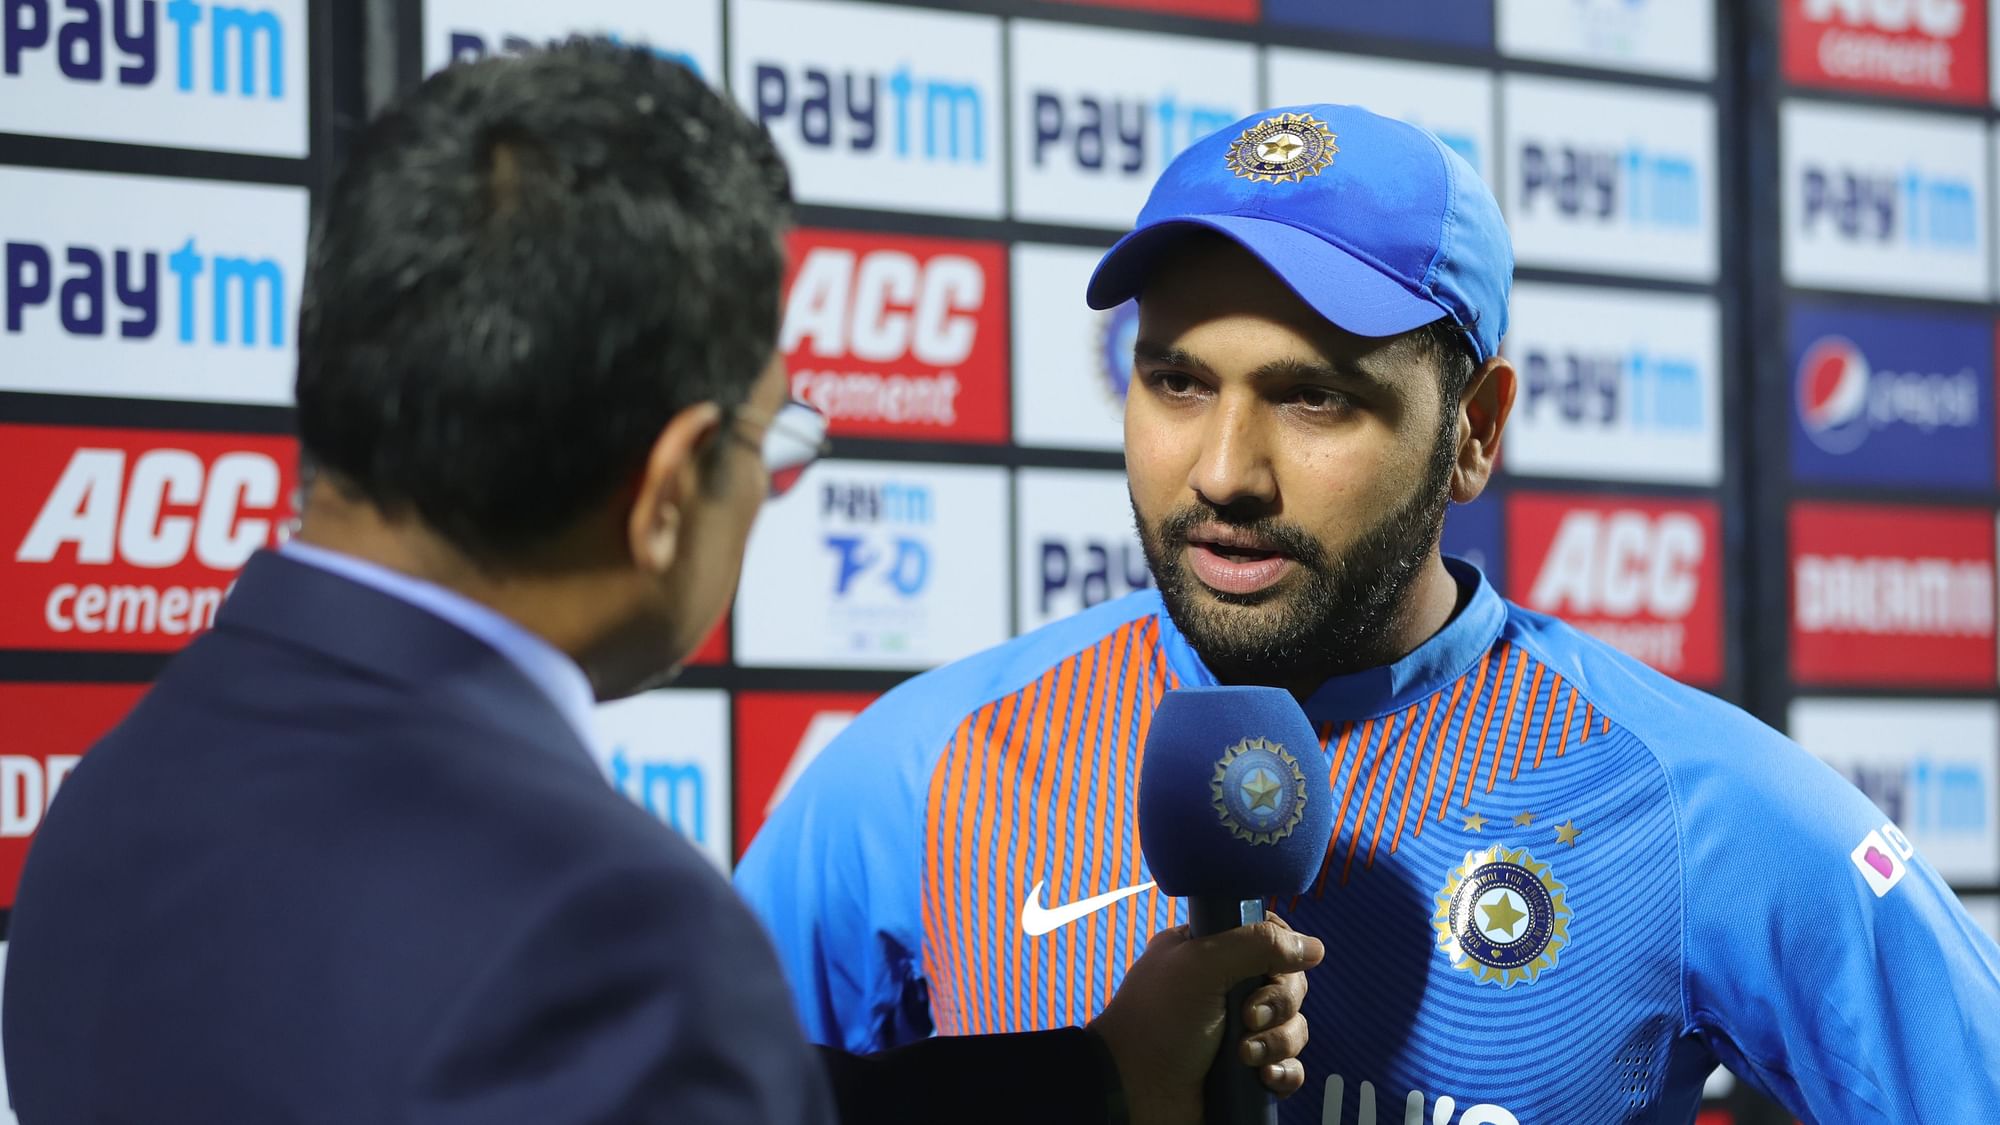 Rohit Sharma gave credit to Bangladesh for winning it in a convincing manner.